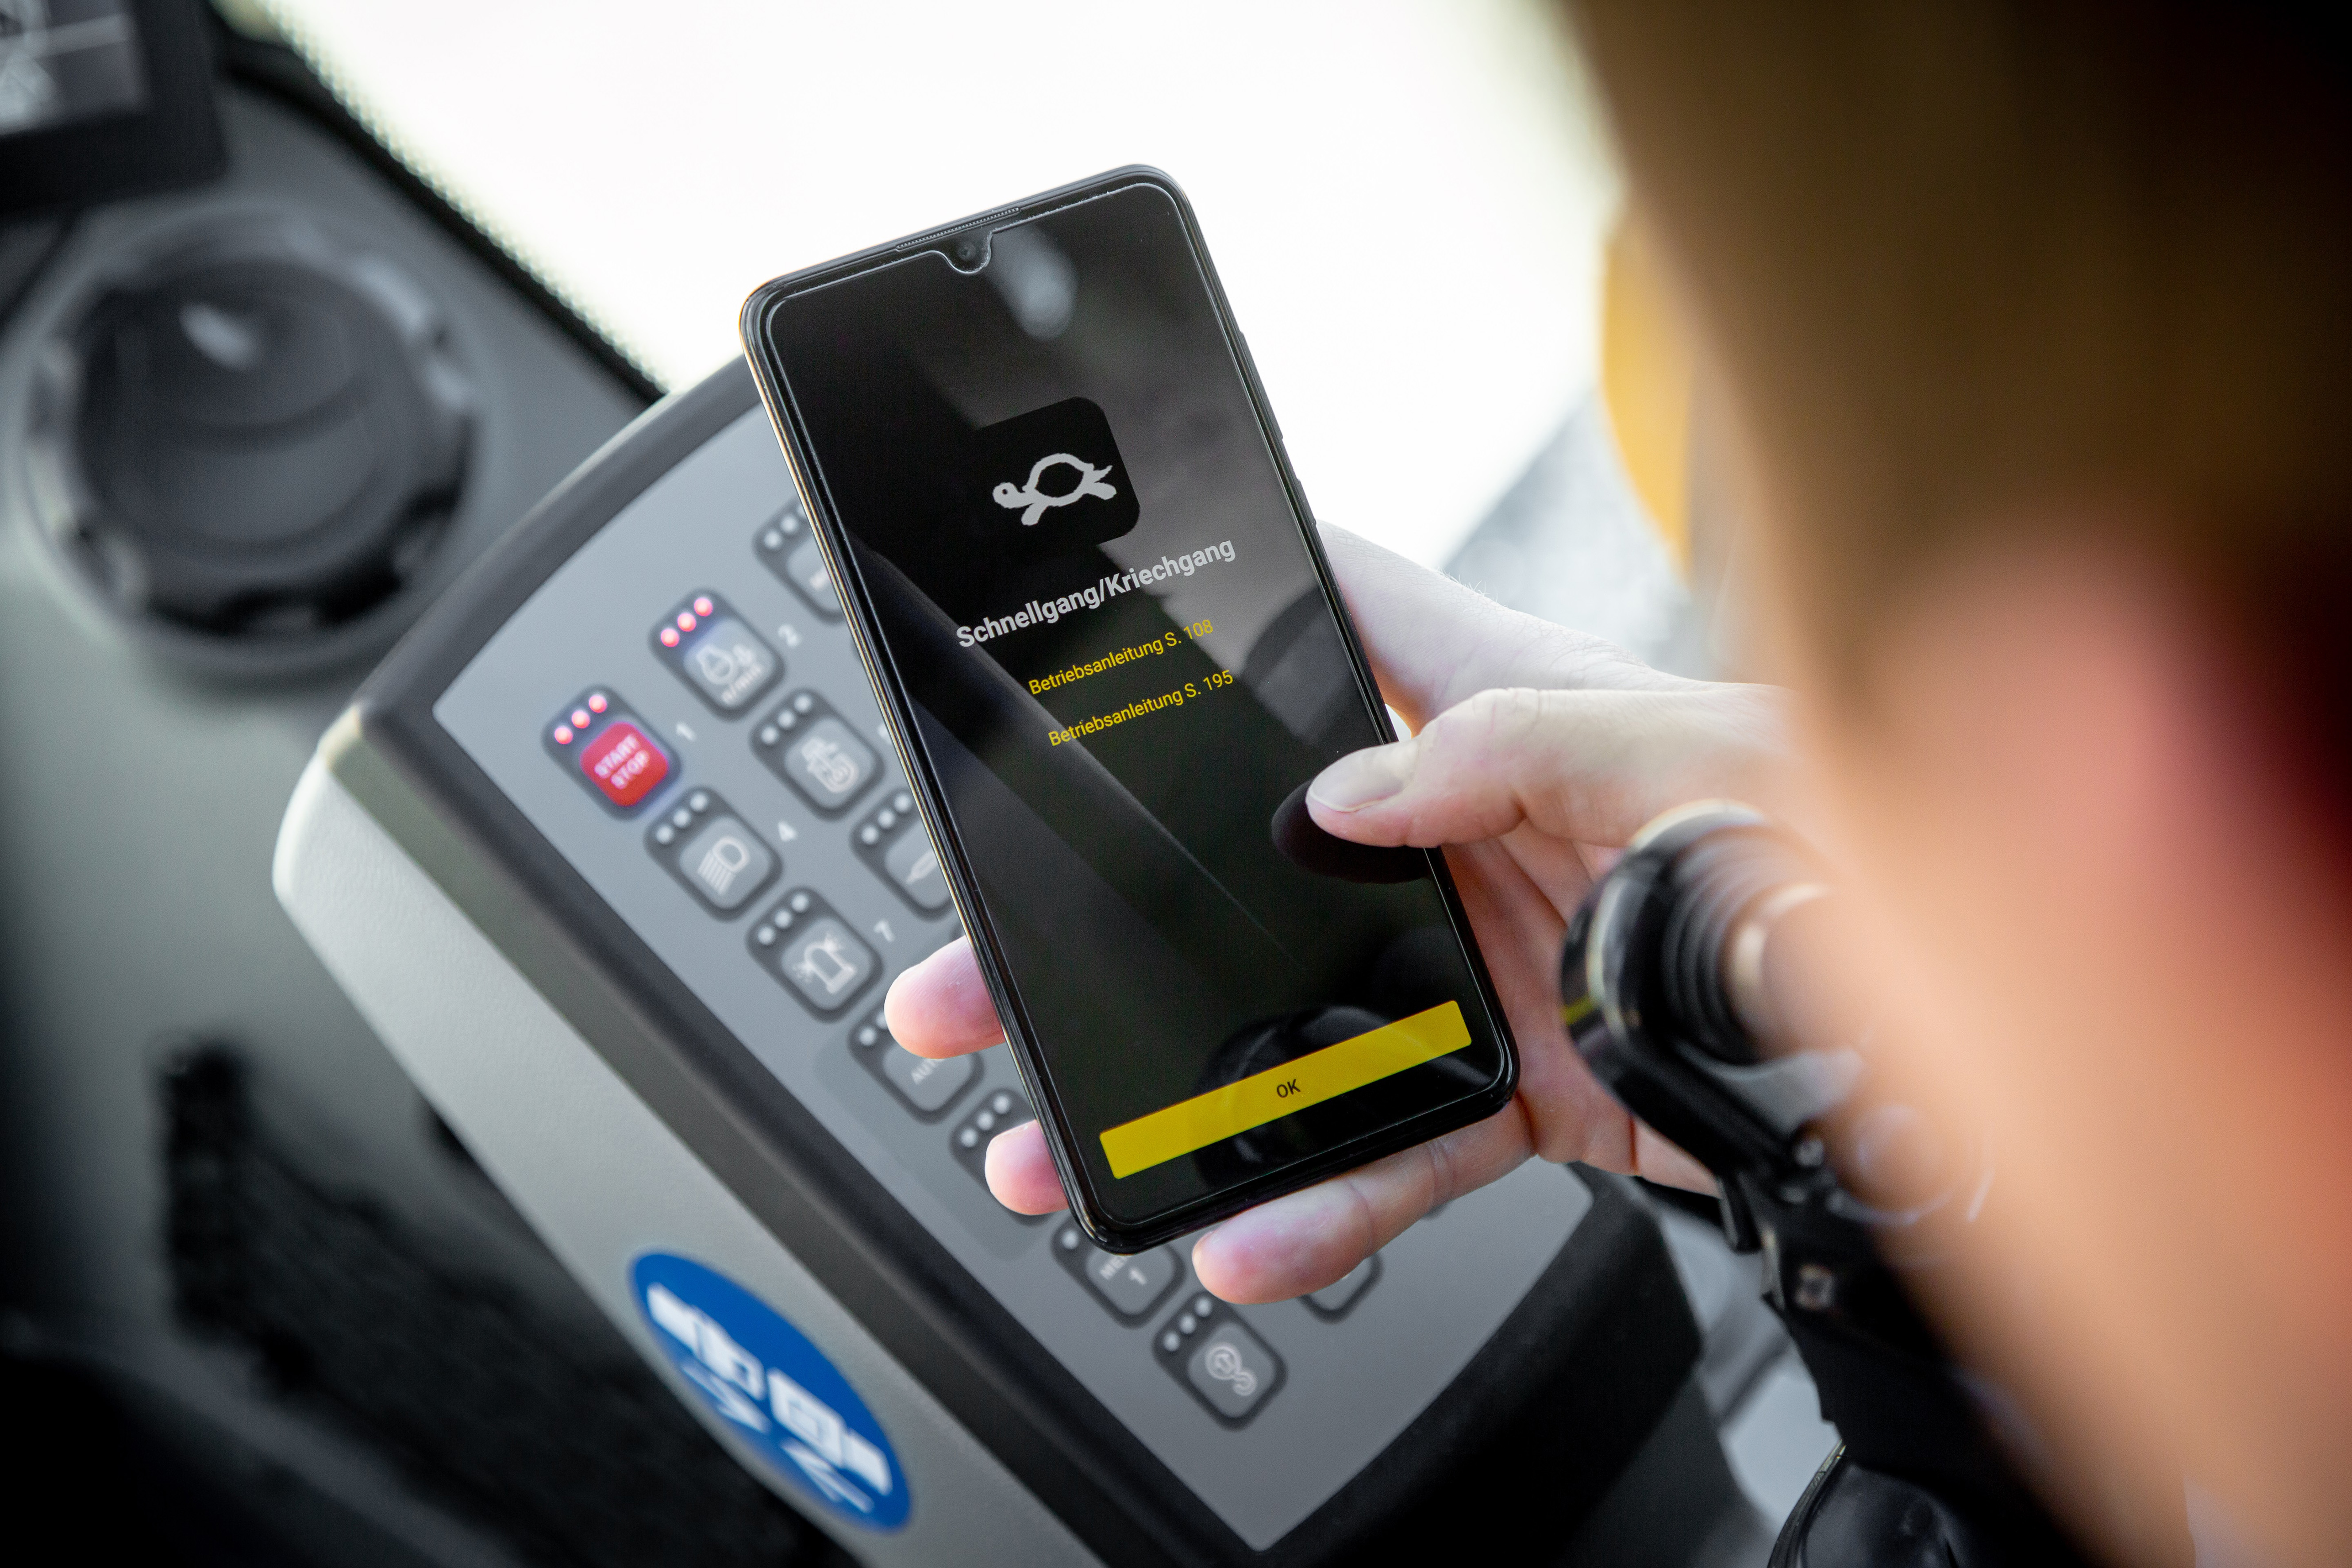 Presenting pioneering services and solutions: the MyAssistant for Earthmoving app digitally provides all relevant information on machine operation and maintenance for Liebherr earthmoving and material handling machines.